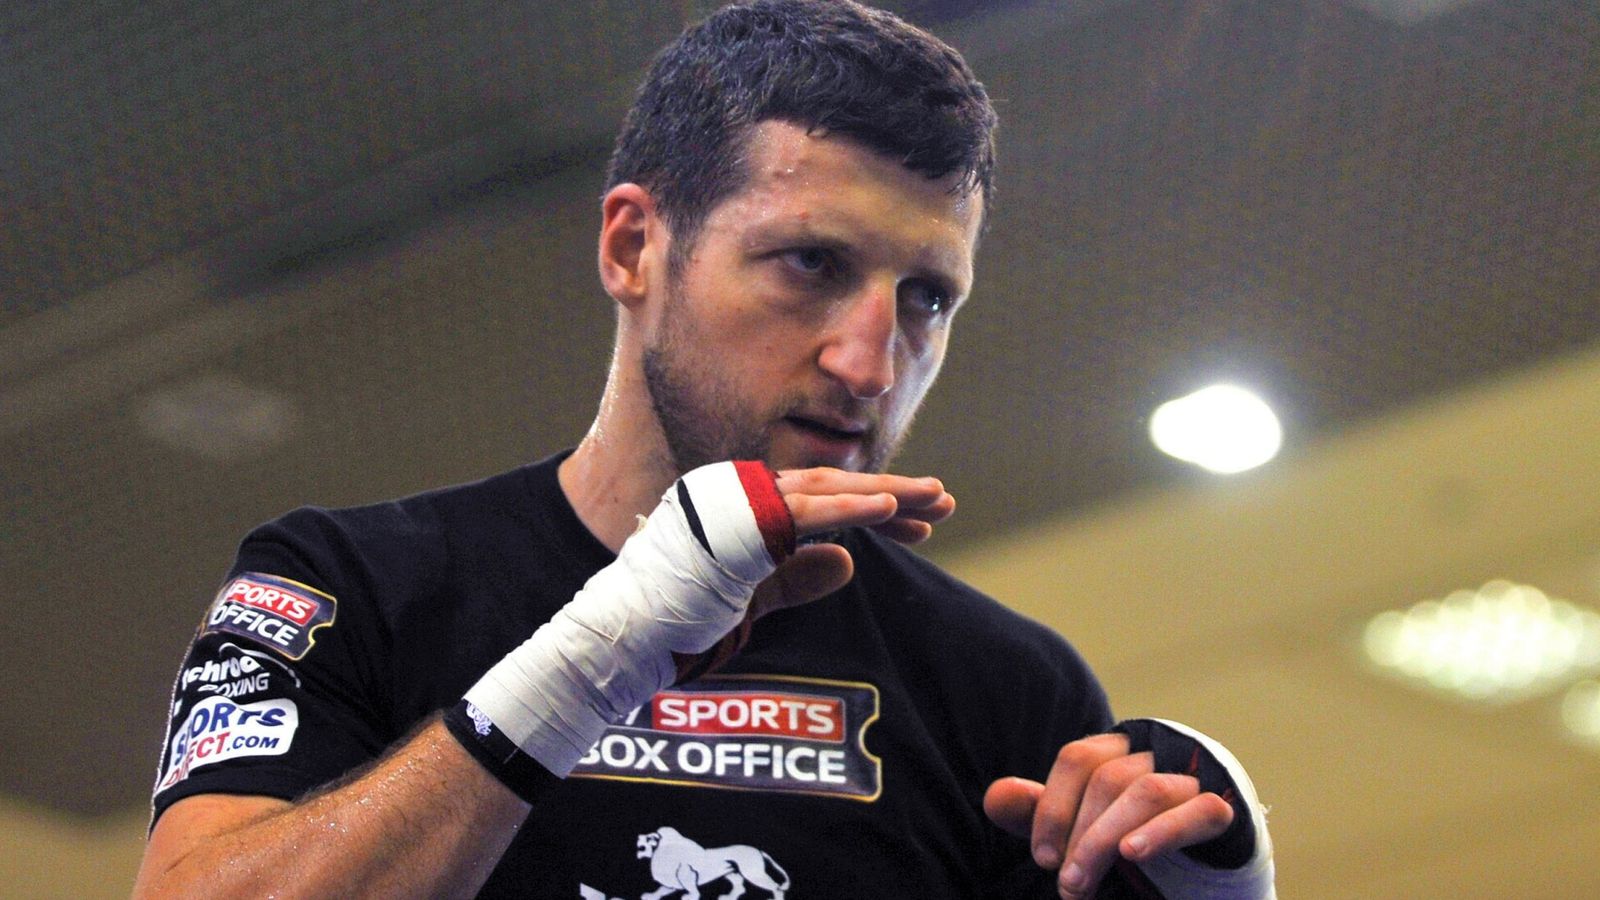 Carl Froch: Chris Eubank Jr can beat Gennadiy Golovkin, but he might lose to Liam Smith on Saturday